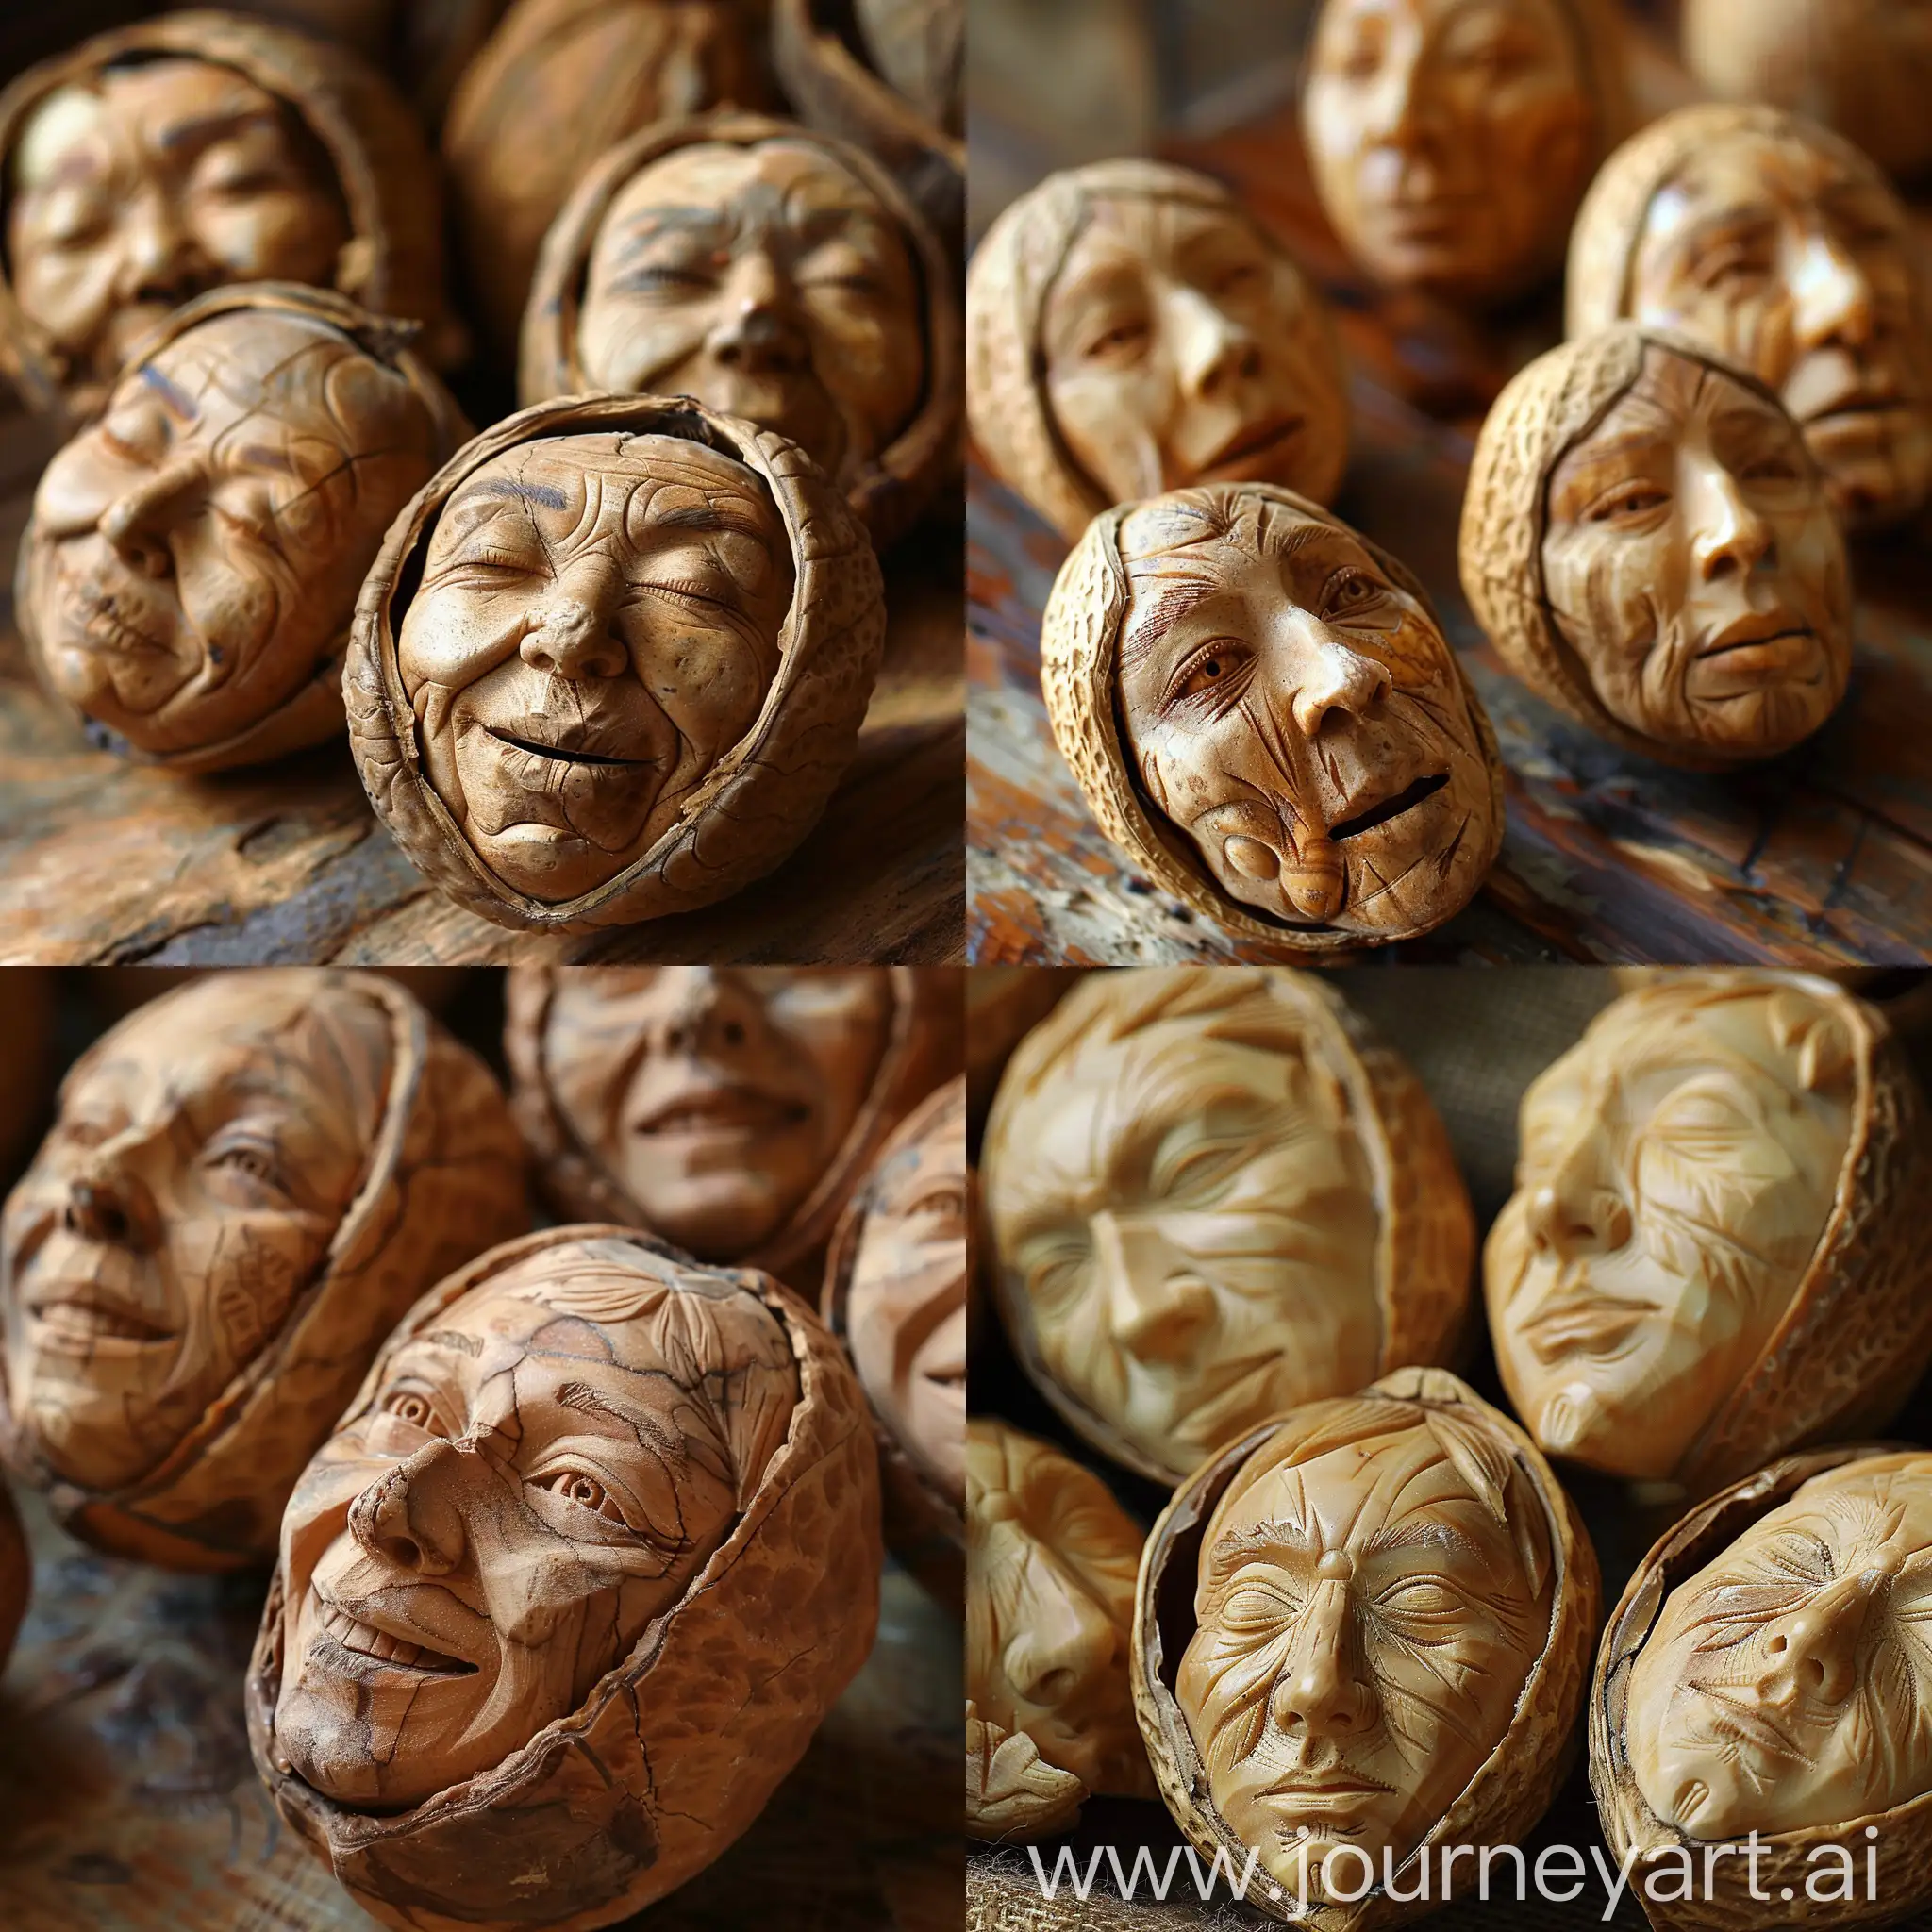 Whimsical-Anthropomorphic-Nuts-with-HandCarved-Faces-6th-Edition